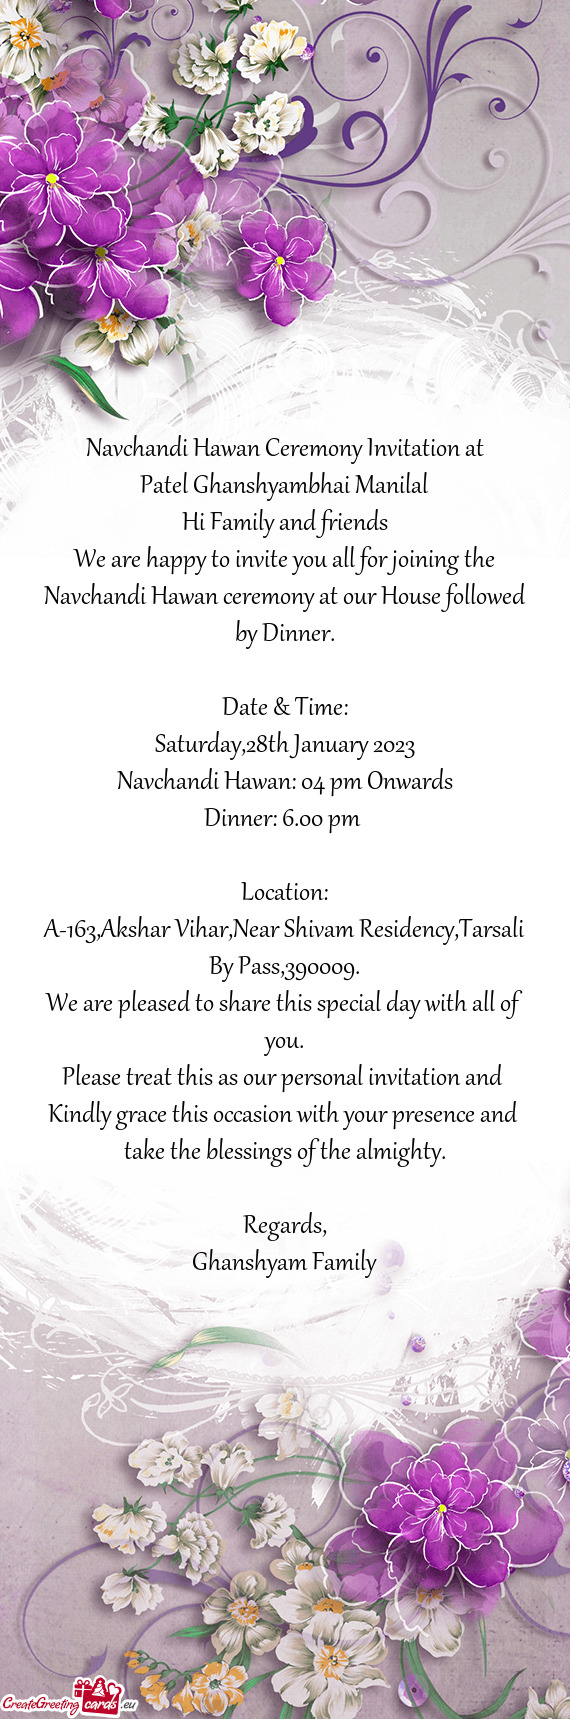 Navchandi Hawan ceremony at our House followed by Dinner